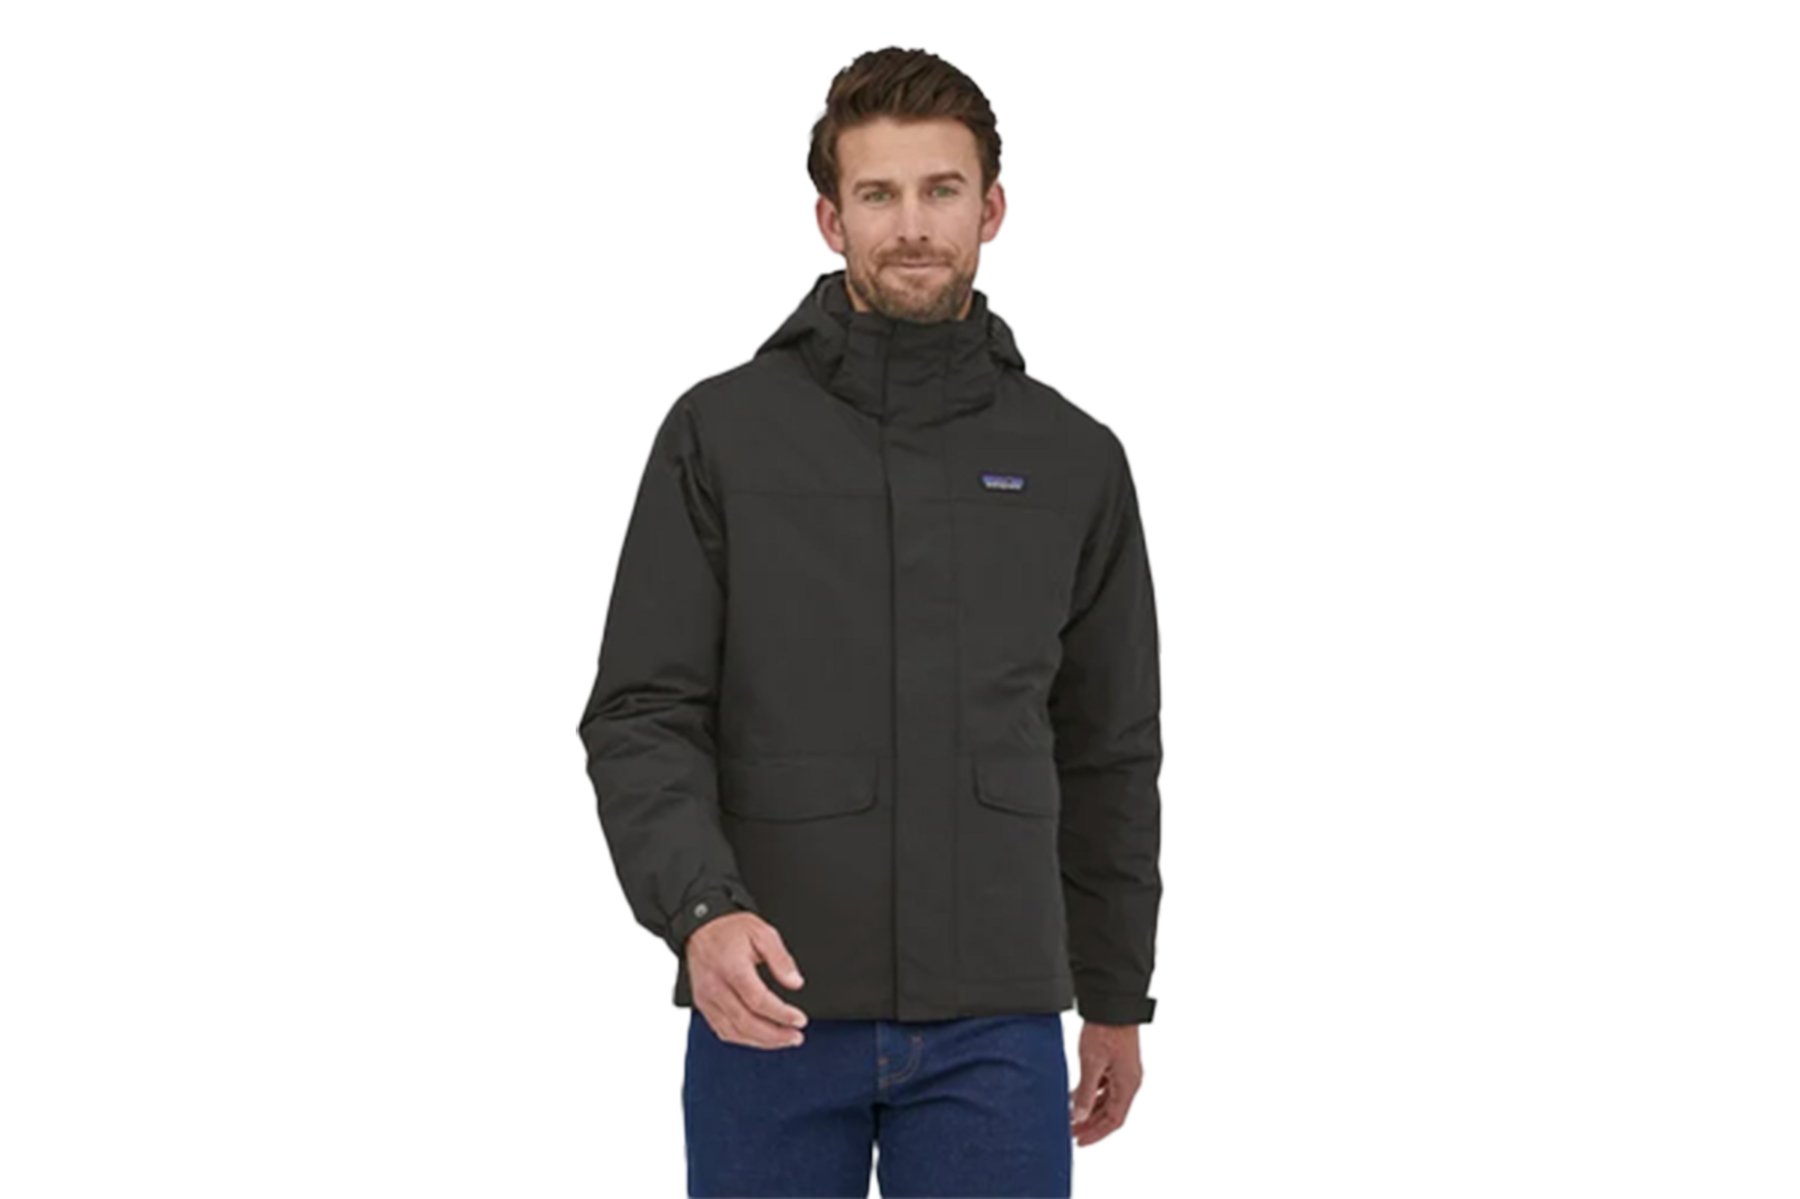 patagonia/メンズ・イスマス・ジャケット<img class='new_mark_img2' src='https://img.shop-pro.jp/img/new/icons1.gif' style='border:none;display:inline;margin:0px;padding:0px;width:auto;' />-small-1